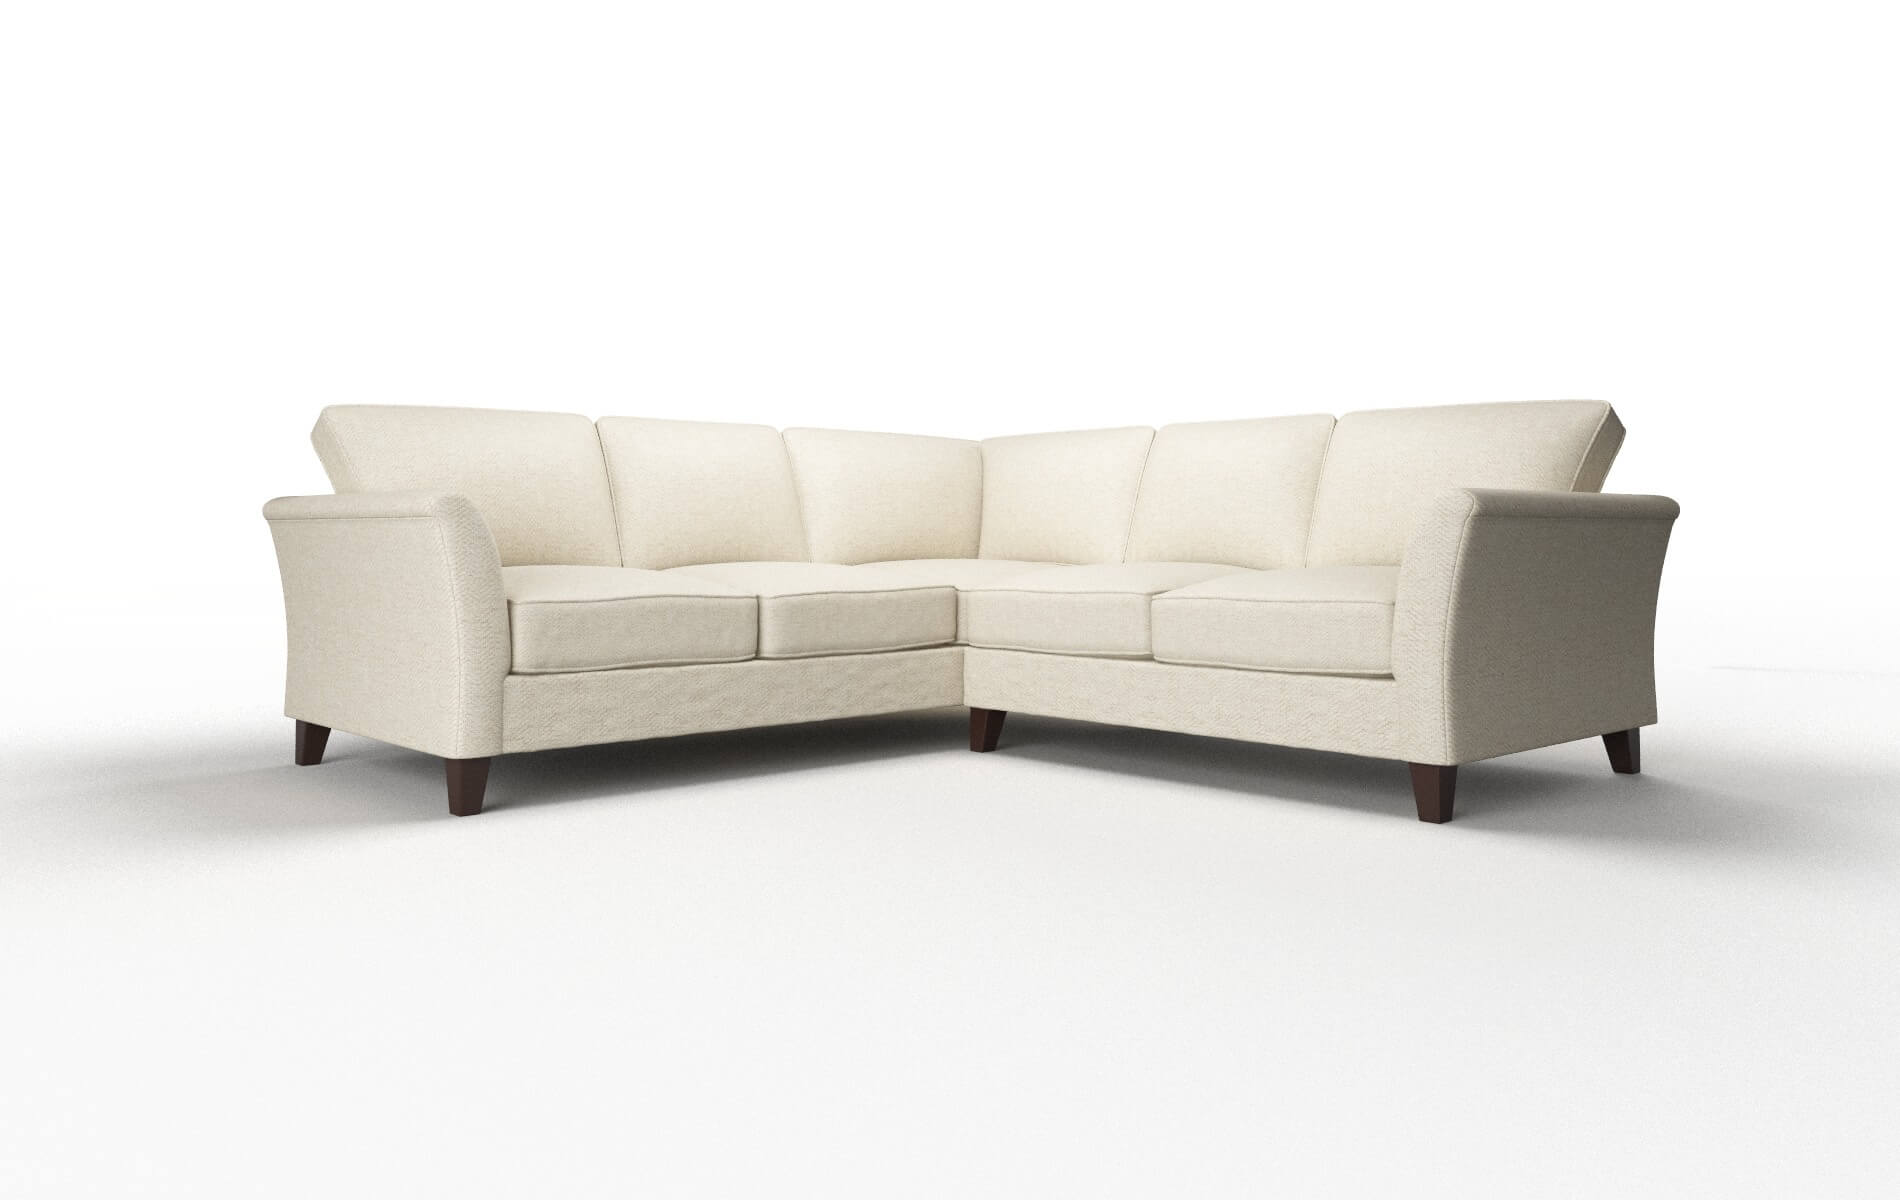 Cologne Catalina Wheat Sectional espresso legs